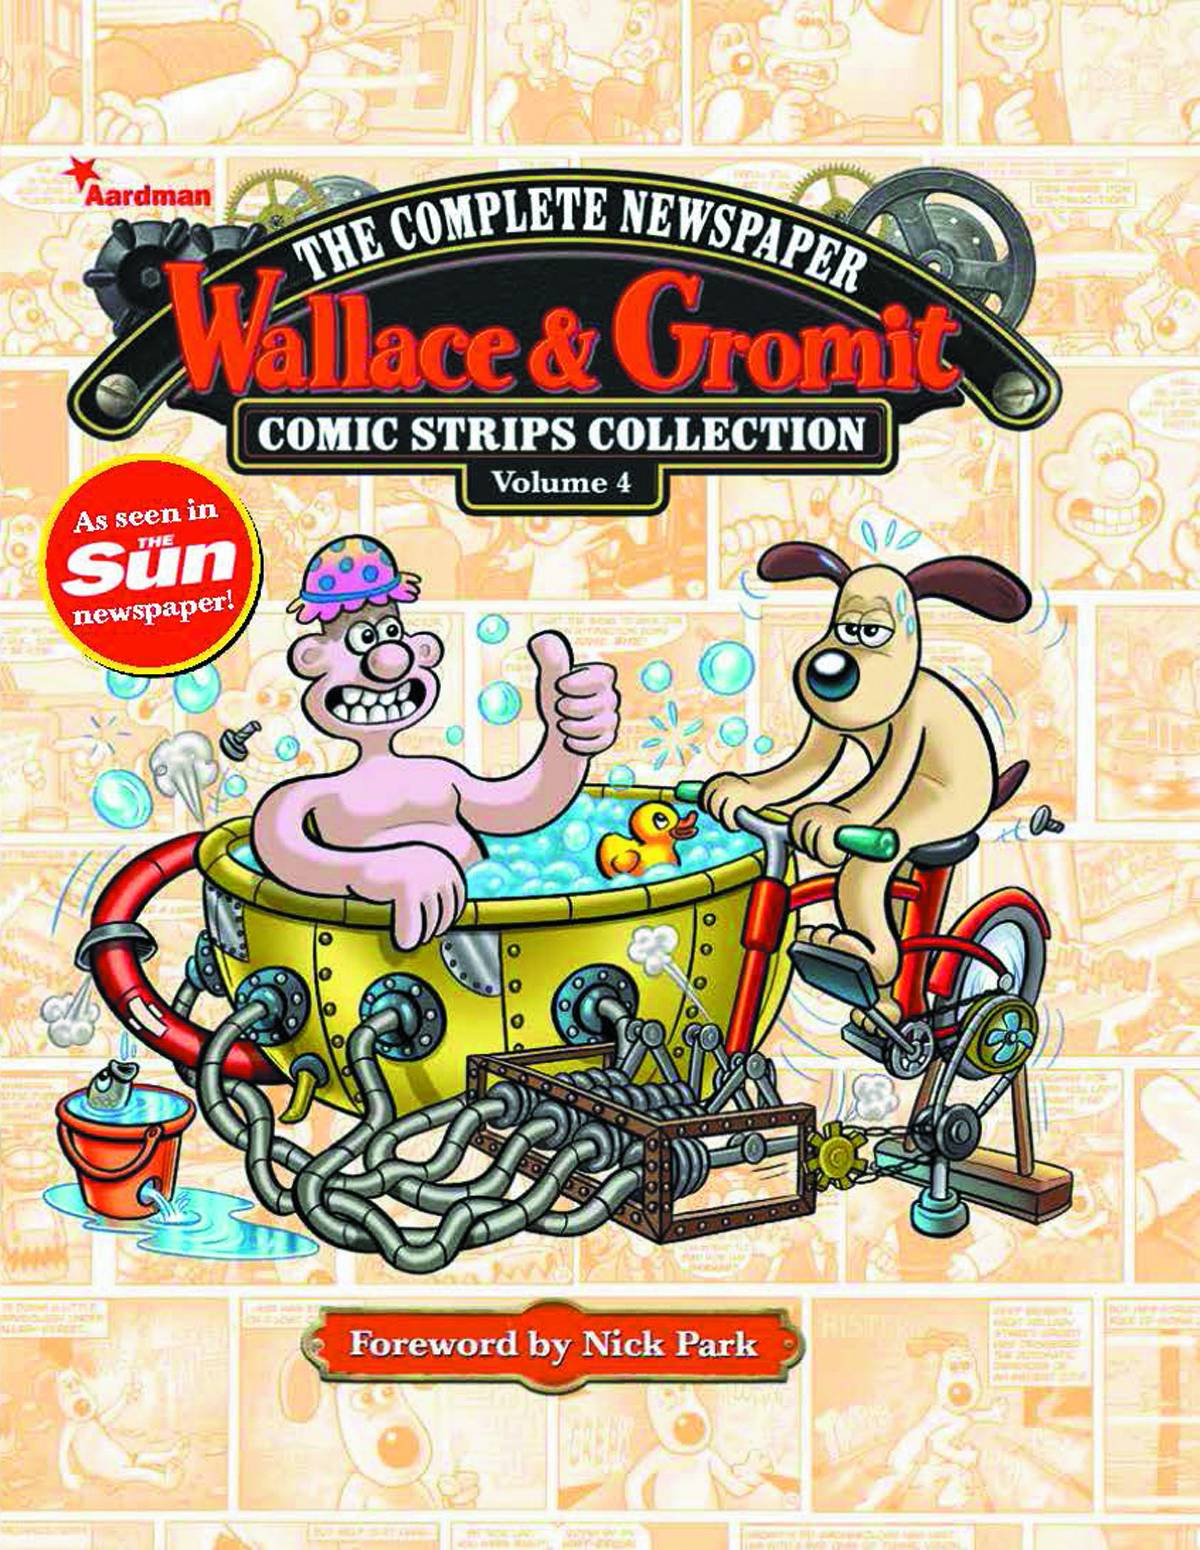 Wallace & Gromit Newspaper Strips Hardcover Volume 4